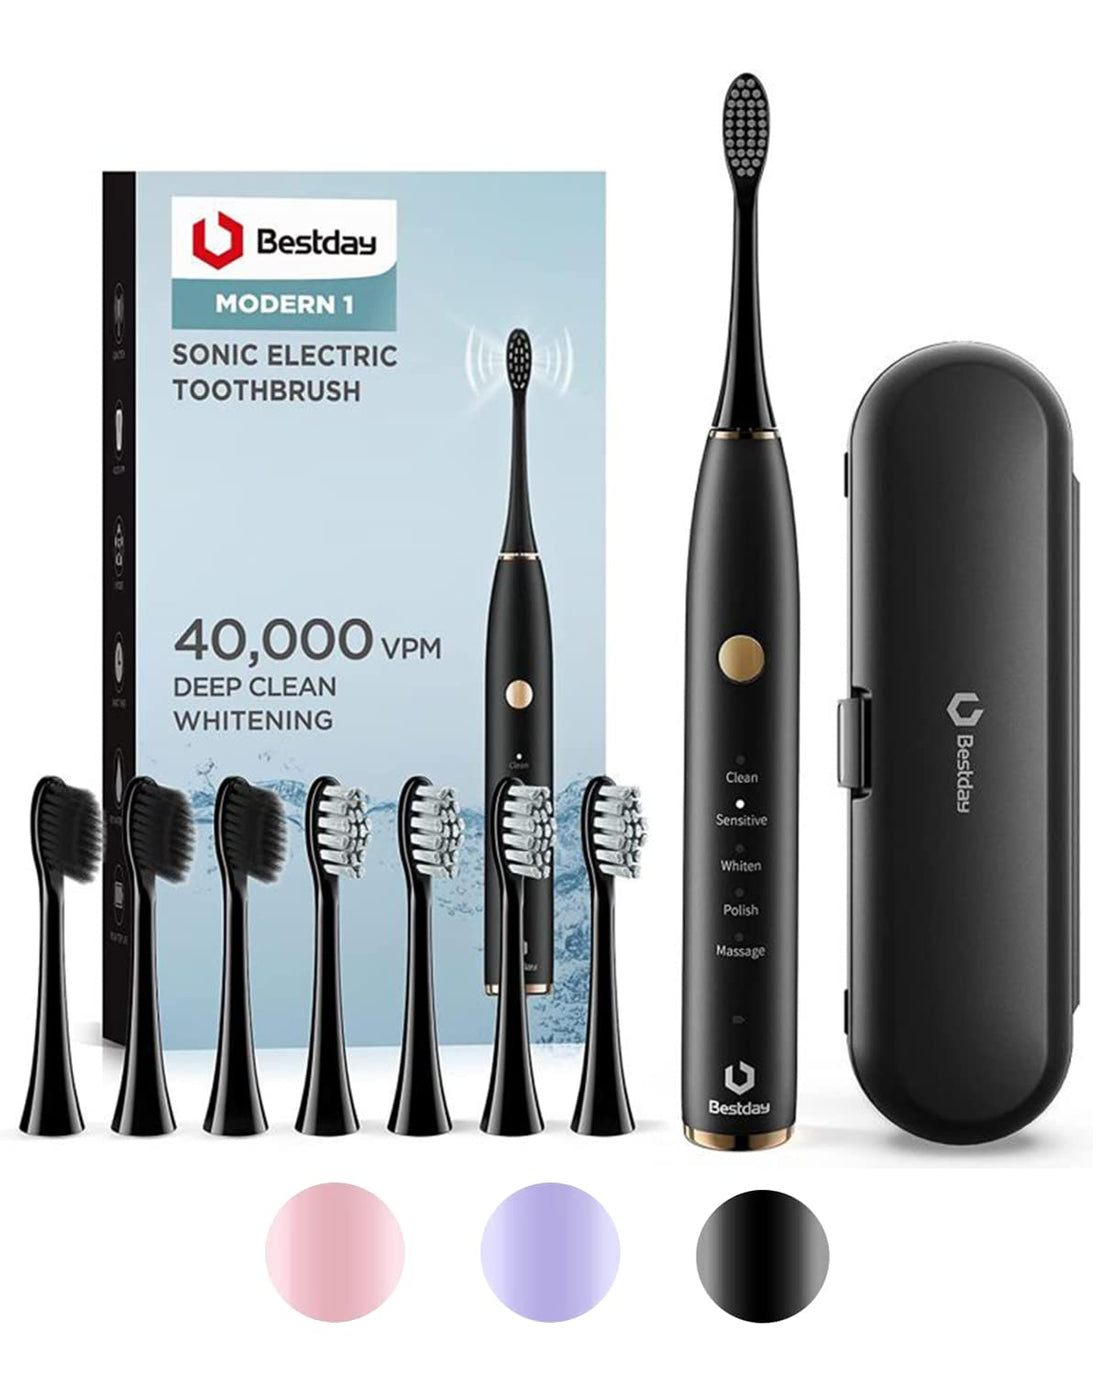 Electric Toothbrushes for Adults, Ultra Whitening Sonic Electric Toothbrush w Charcoal Bristle, 180 Days Battery Life, 8 Brush Heads & Travel Case, 5 Modes w Smart Timer for Braces, Waterproof, Black